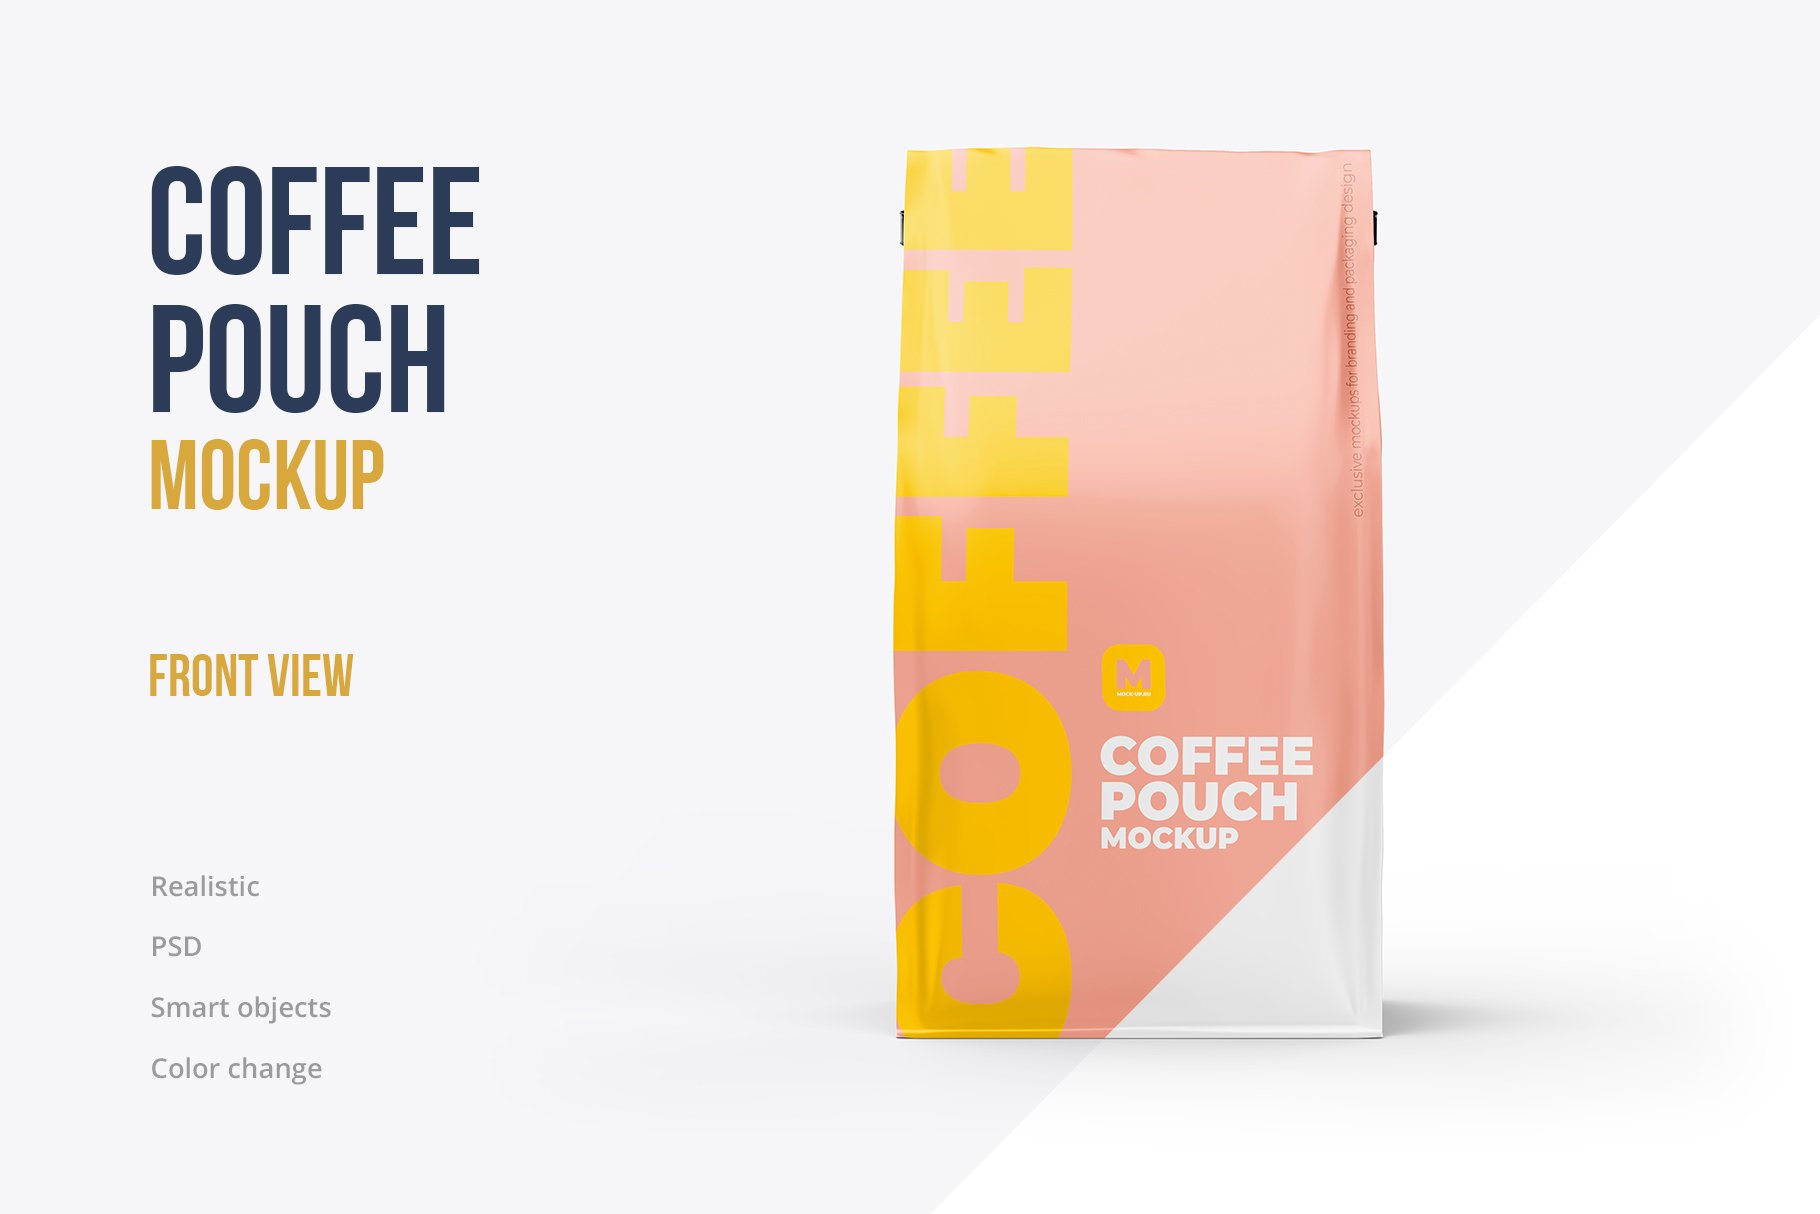 Coffee pouch mockup. Pack 6 PSD preview image.